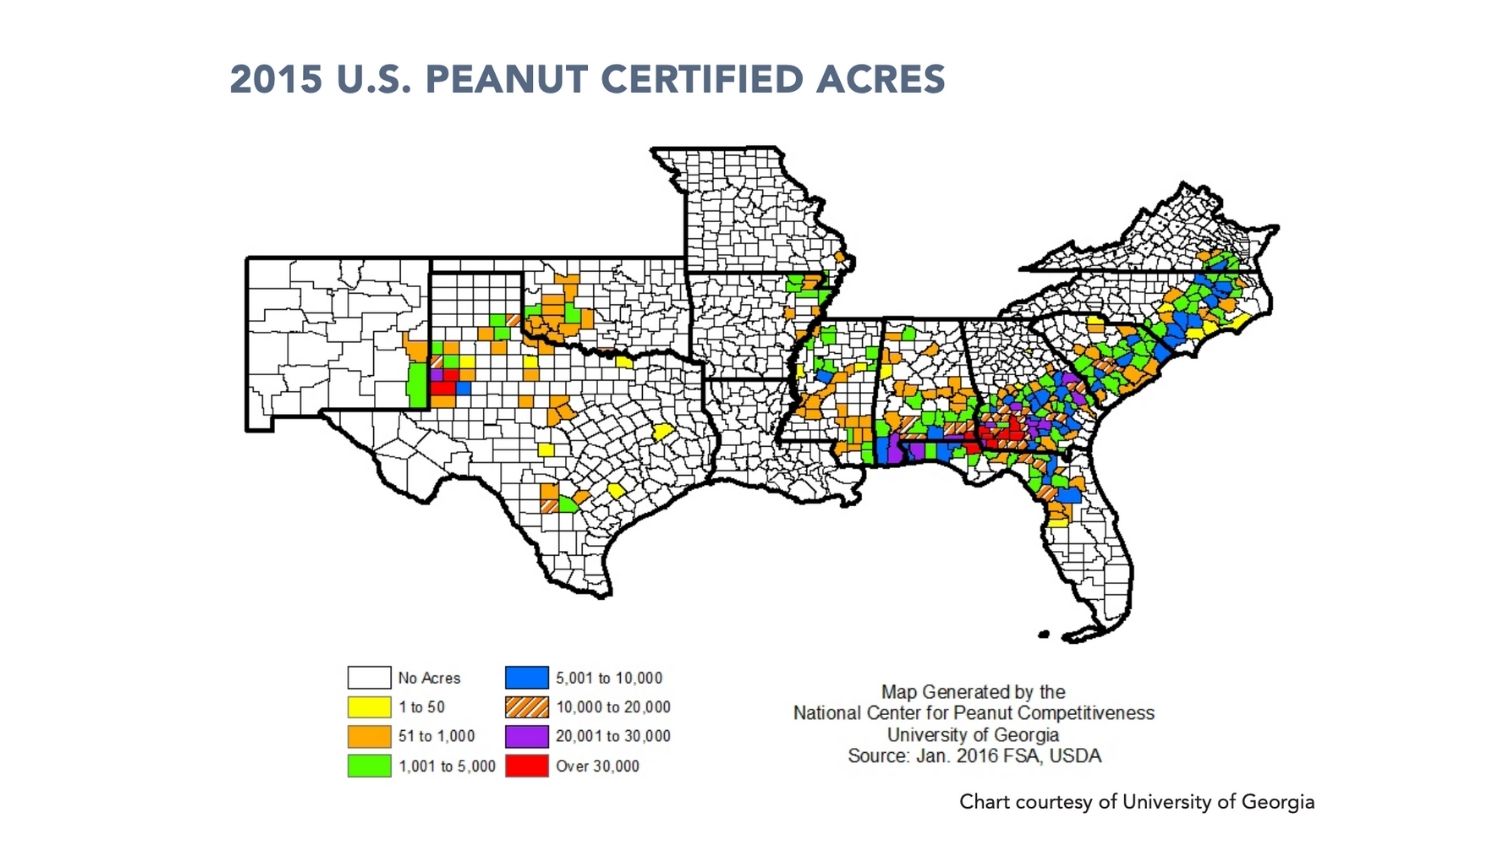 Peanut-producing counties in the U.S,